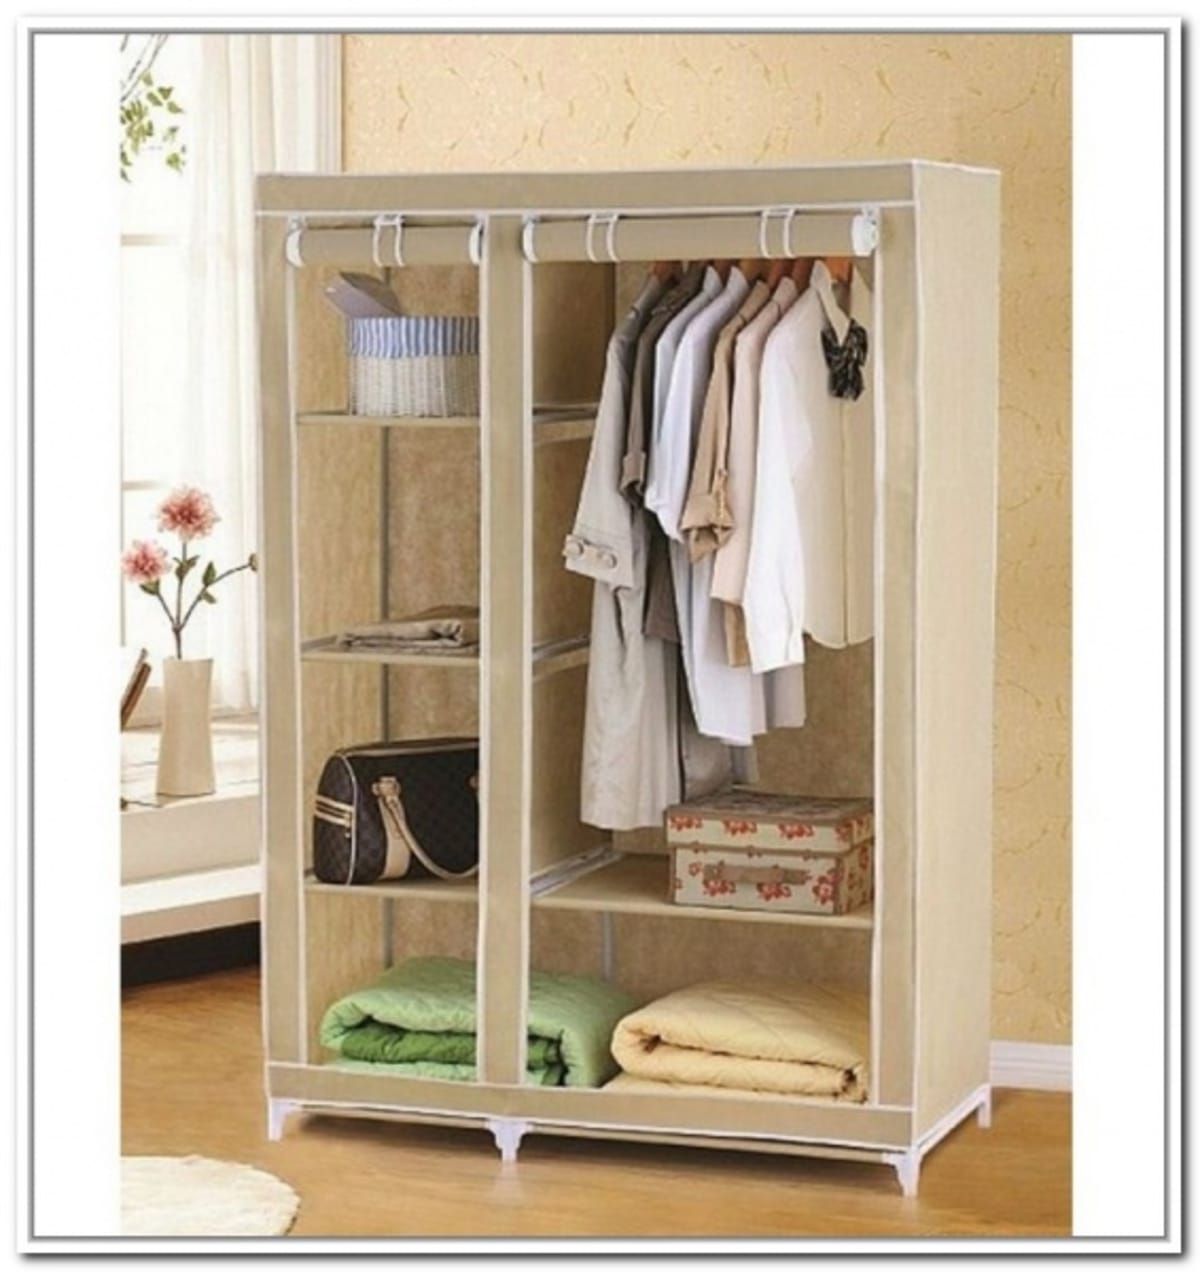 Mobile Wardrobe | Konga Online Shopping Intended For Mobile Wardrobe Cabinets (View 11 of 15)